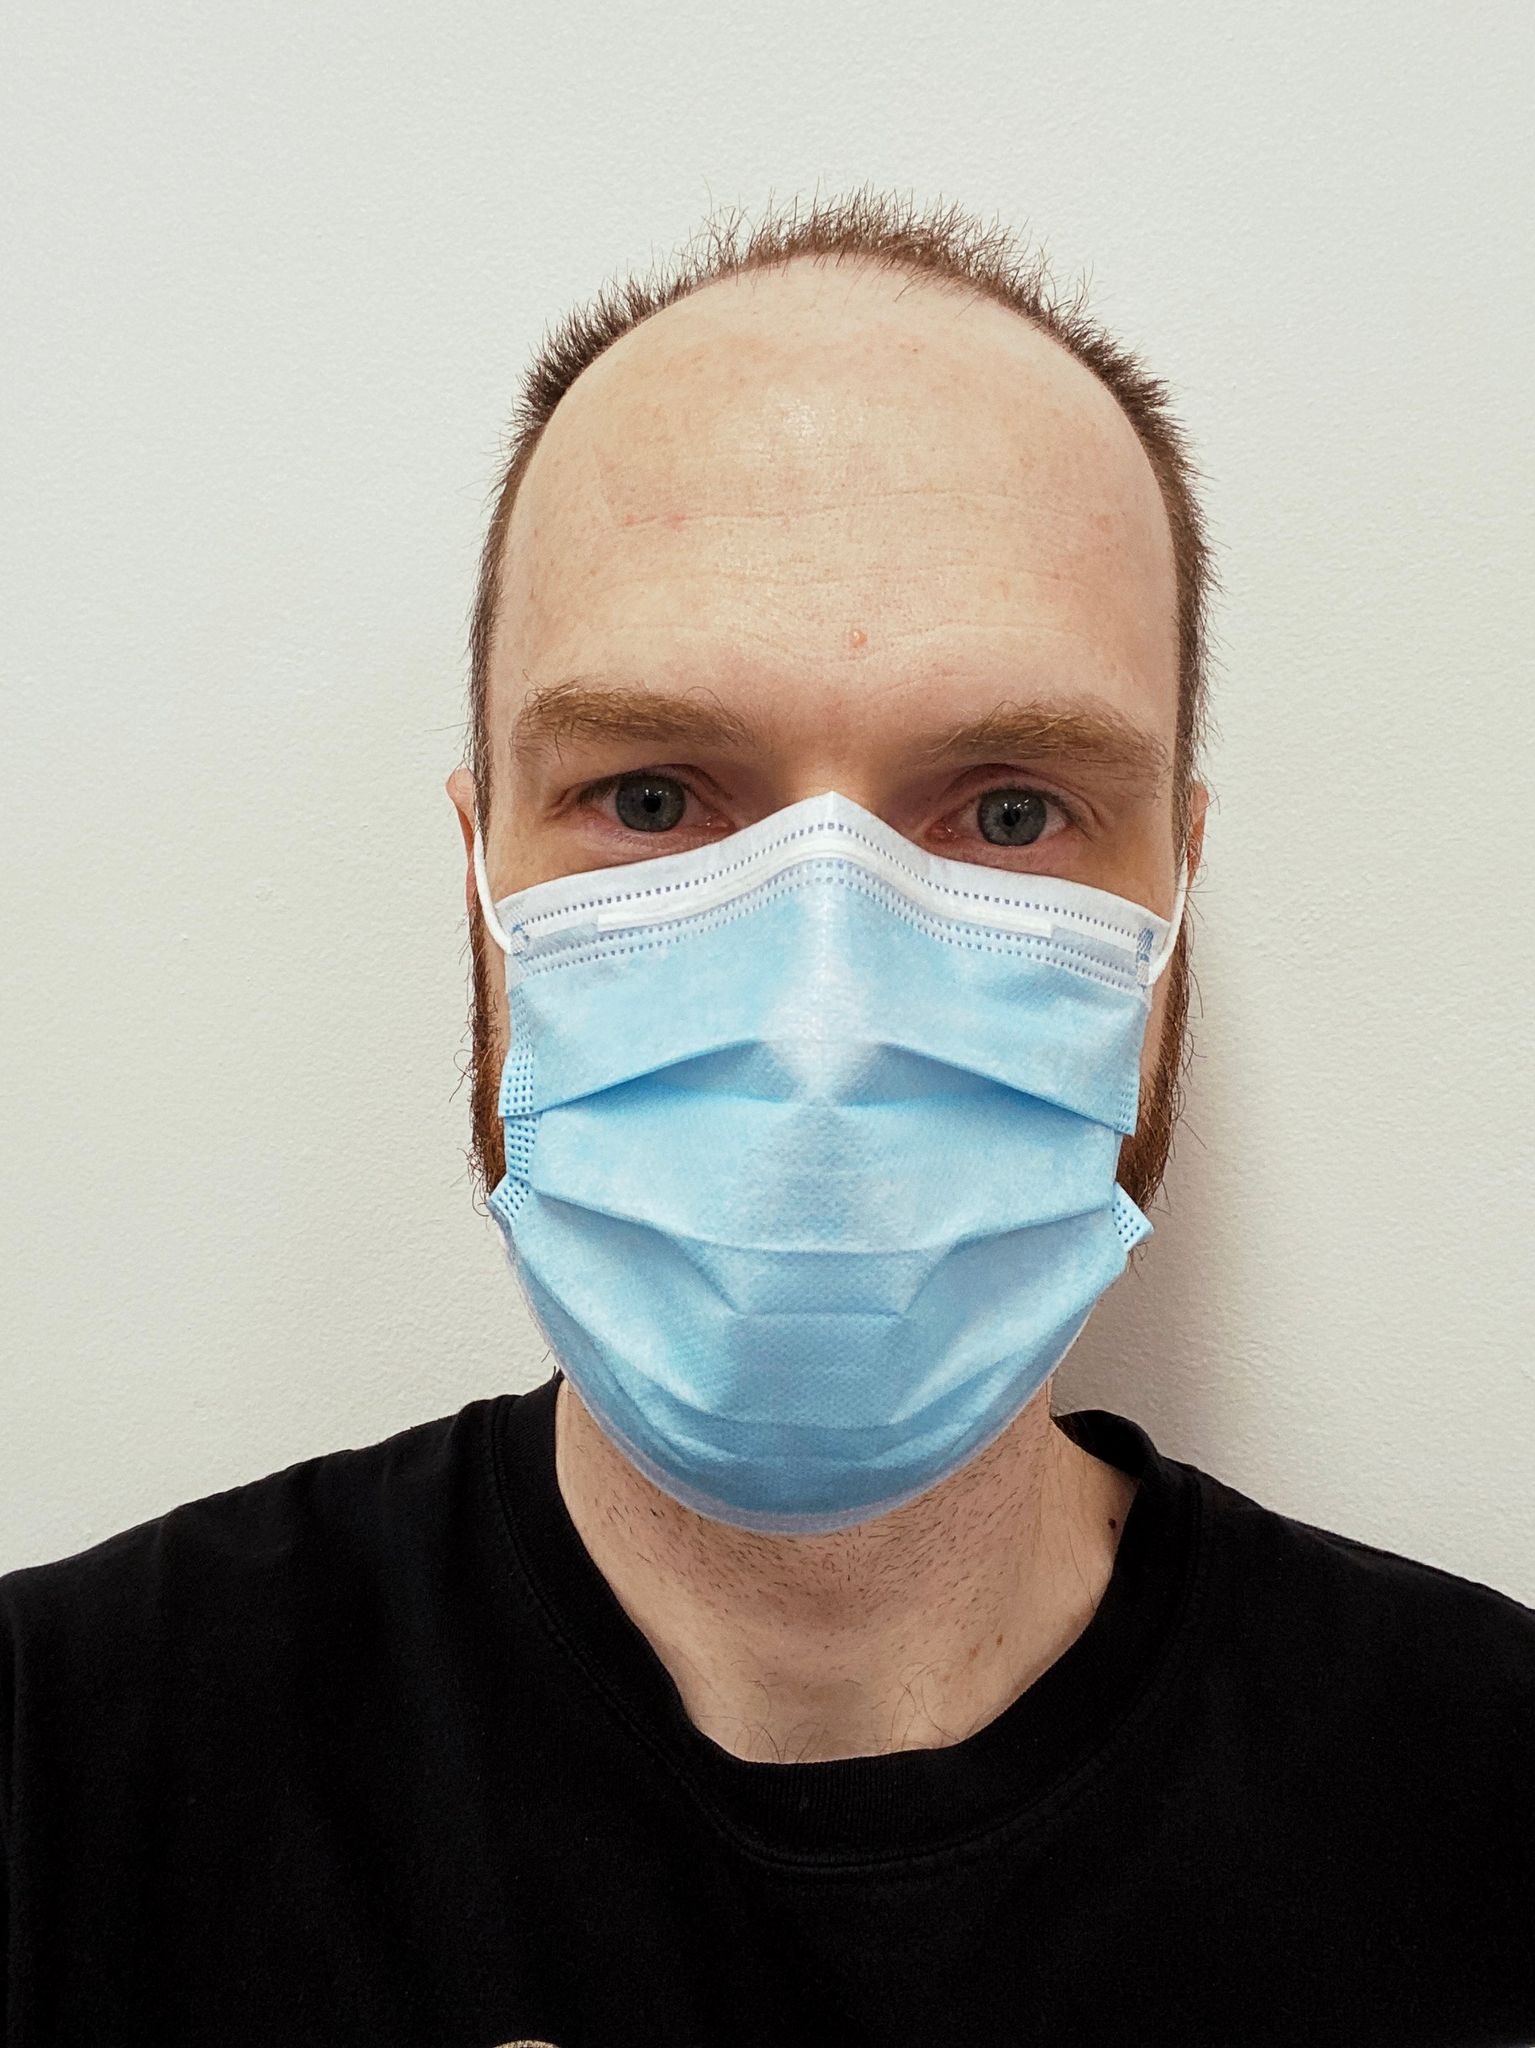 A selfie of me, a white man with short hair and, uh, let's call it a very large forehead, wearing a blue surgical mask.